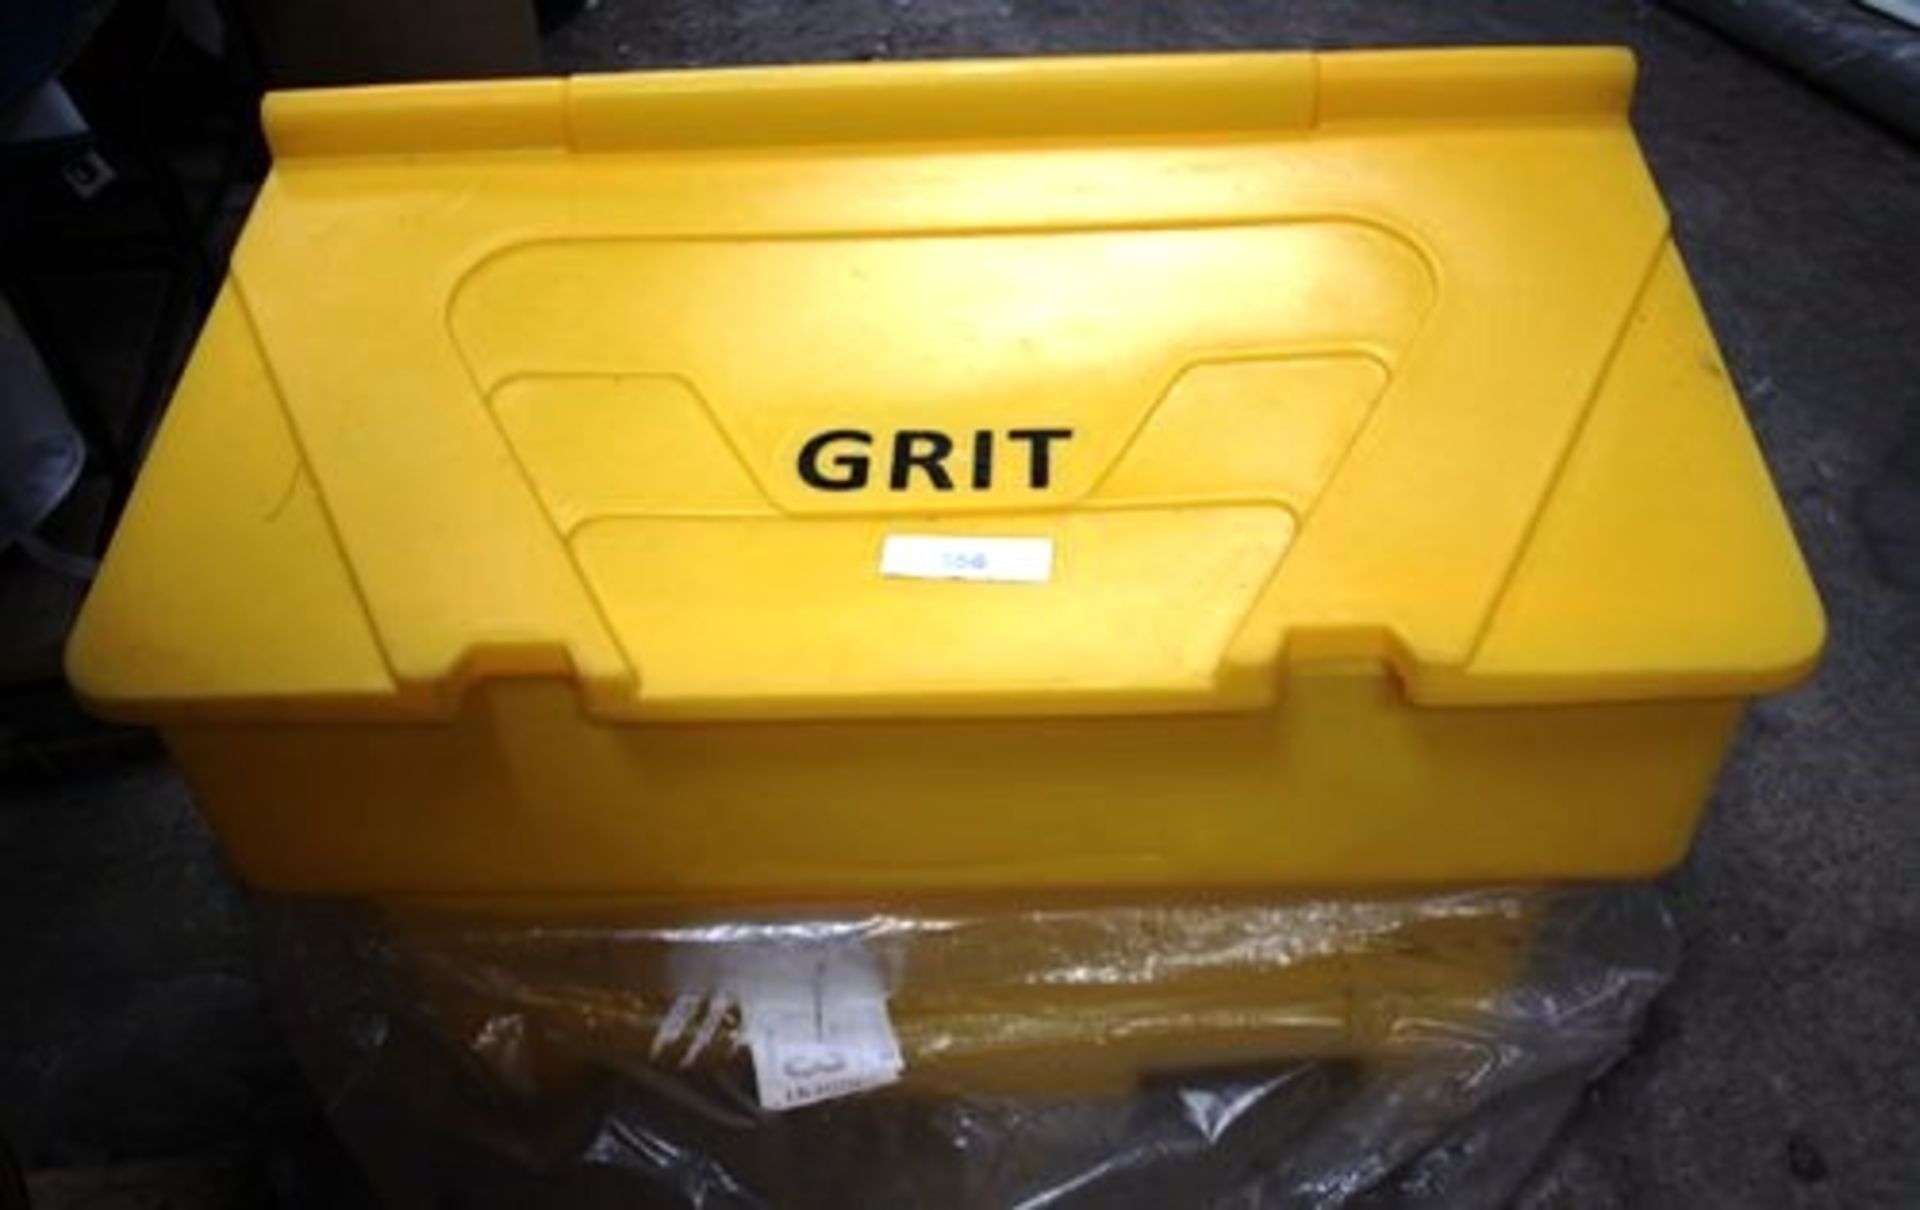 1 x large yellow grit bin - New (Open shed)